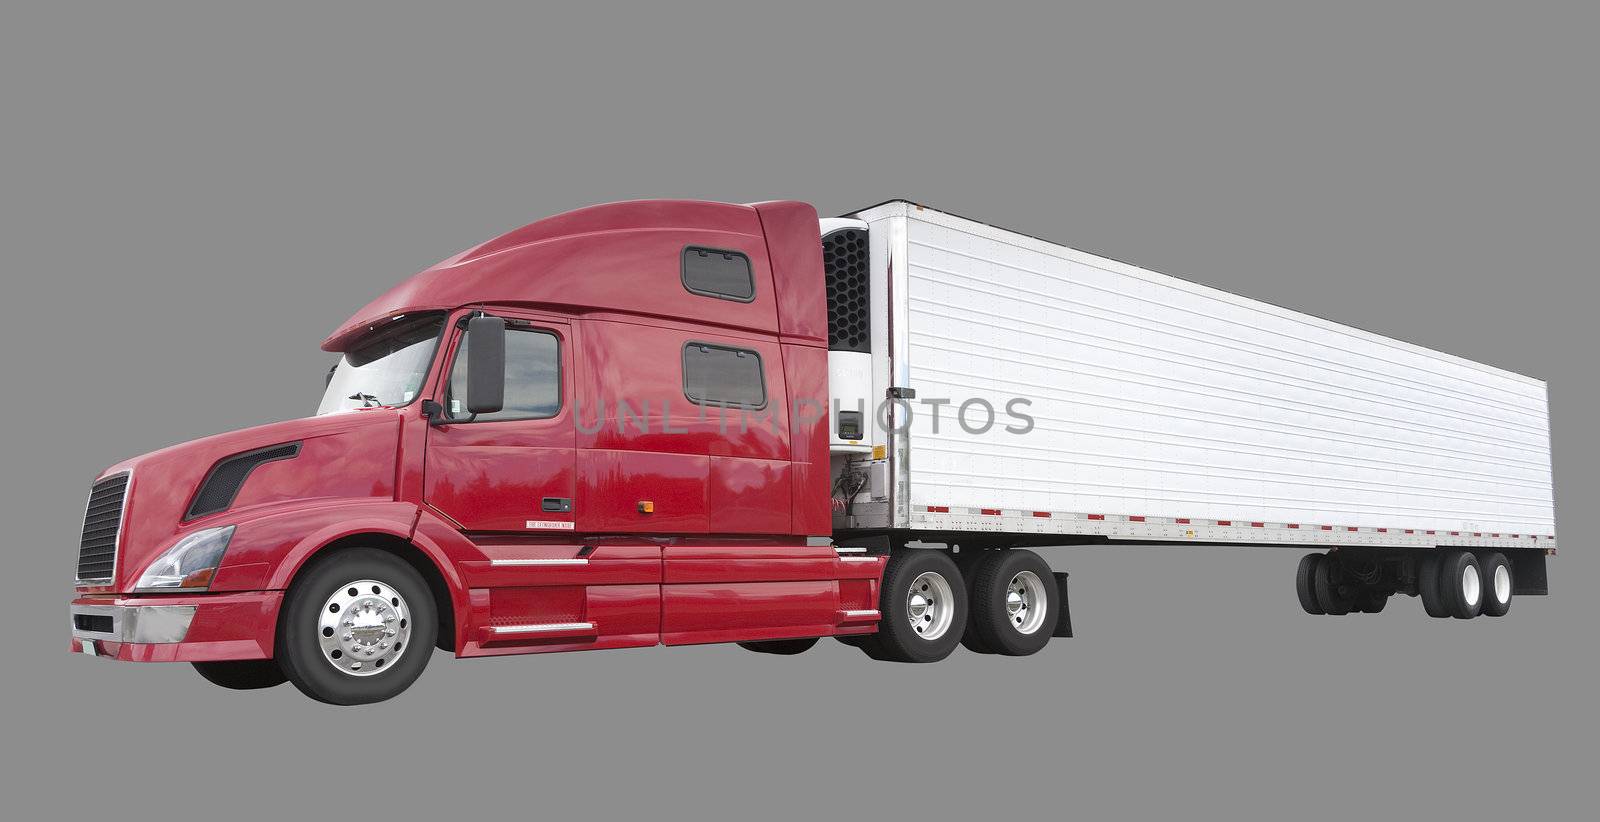 Freight truck with blank side for advertising, isolated on gray